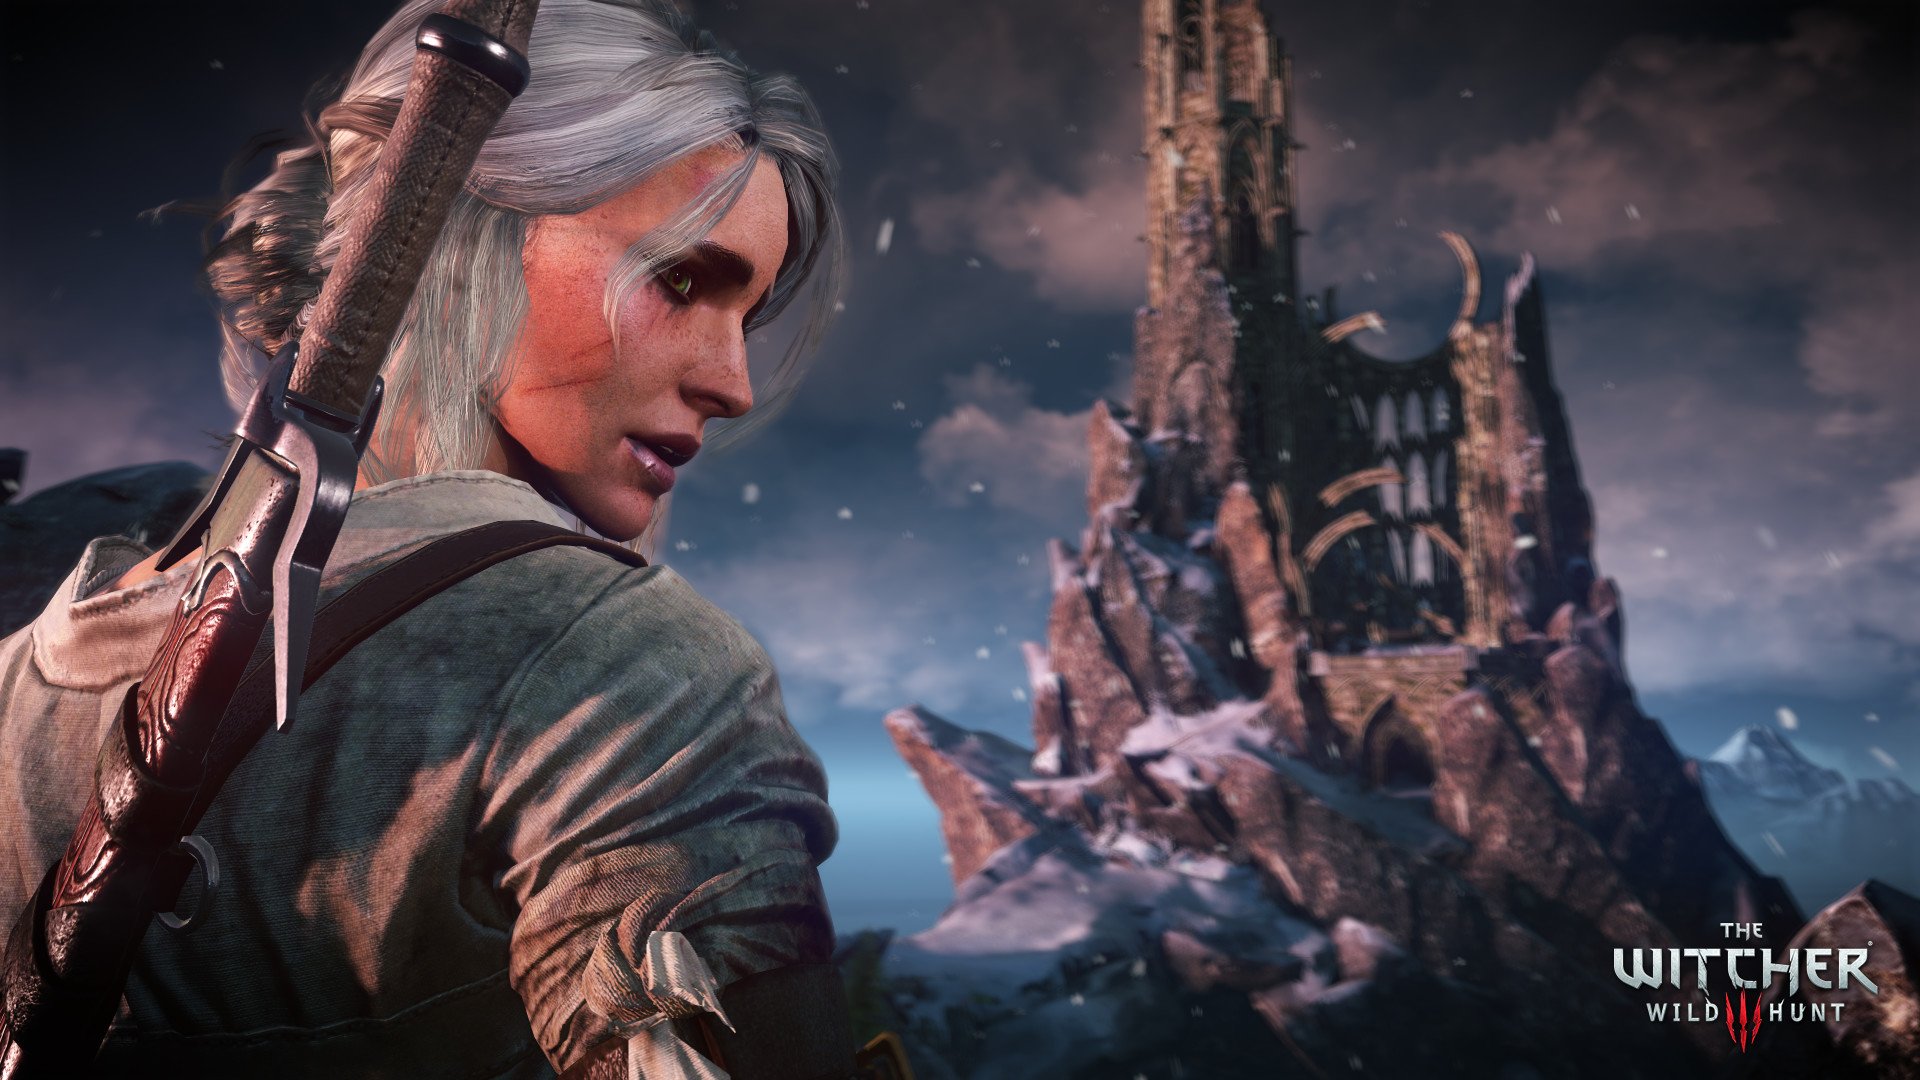 The Witcher 3 Next-Gen Trailer Shows Off Netflix Series-Based Content